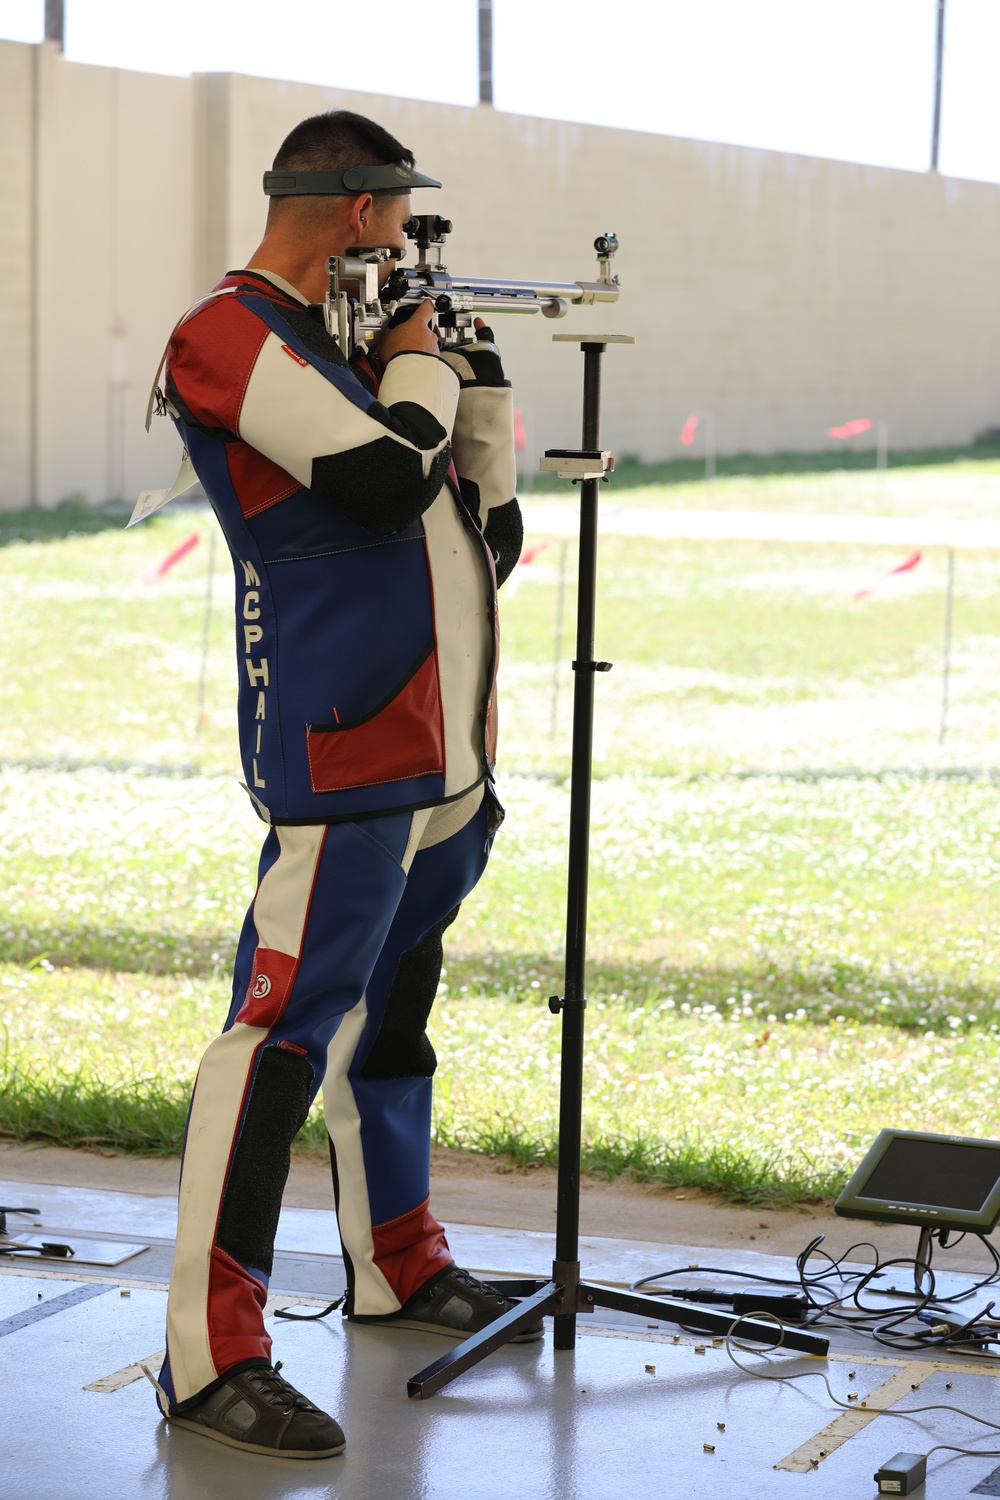 Fort Benning Soldier competes at 2019 Pan American Games